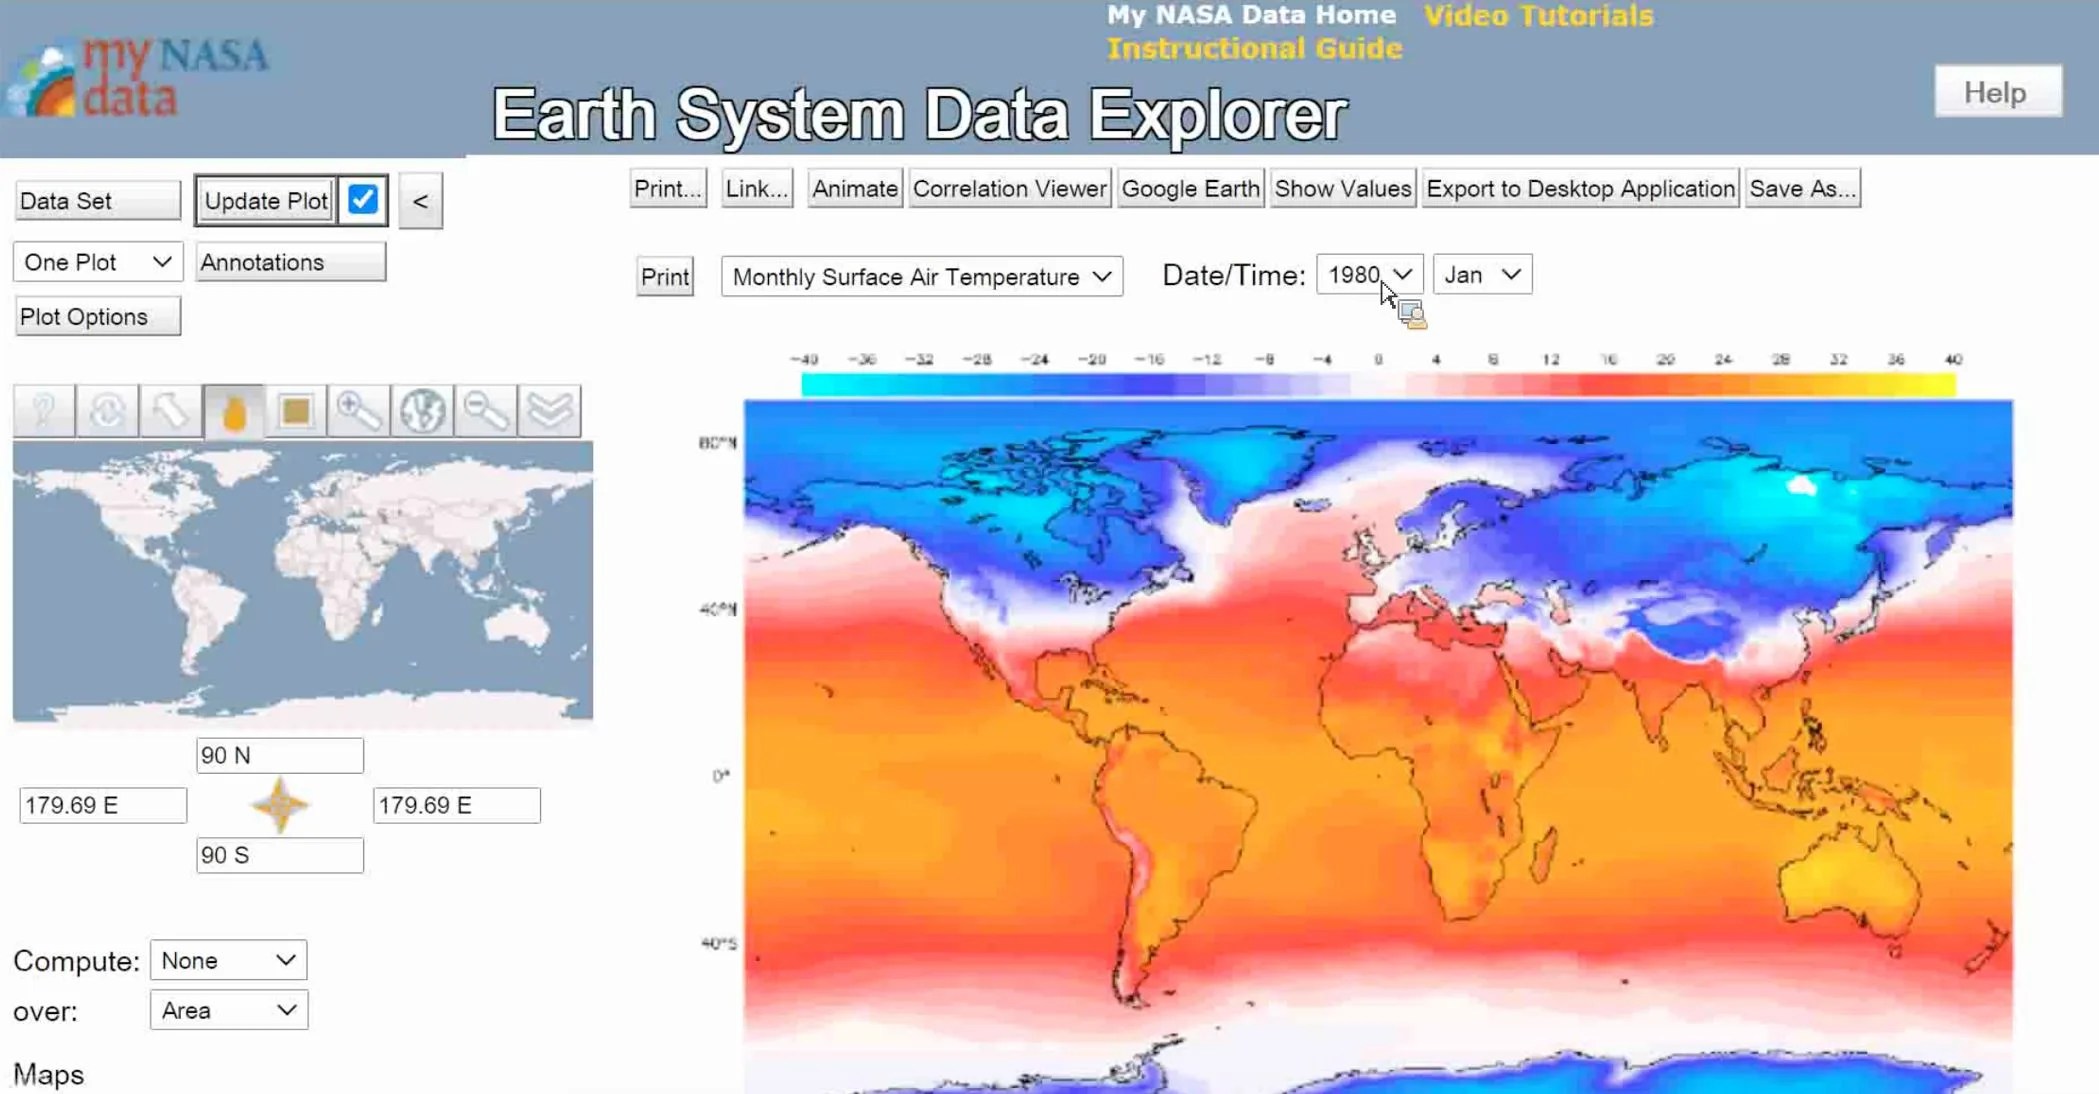 Screenshot from the Earth System Data Explorer featuring an interactive global heat map.